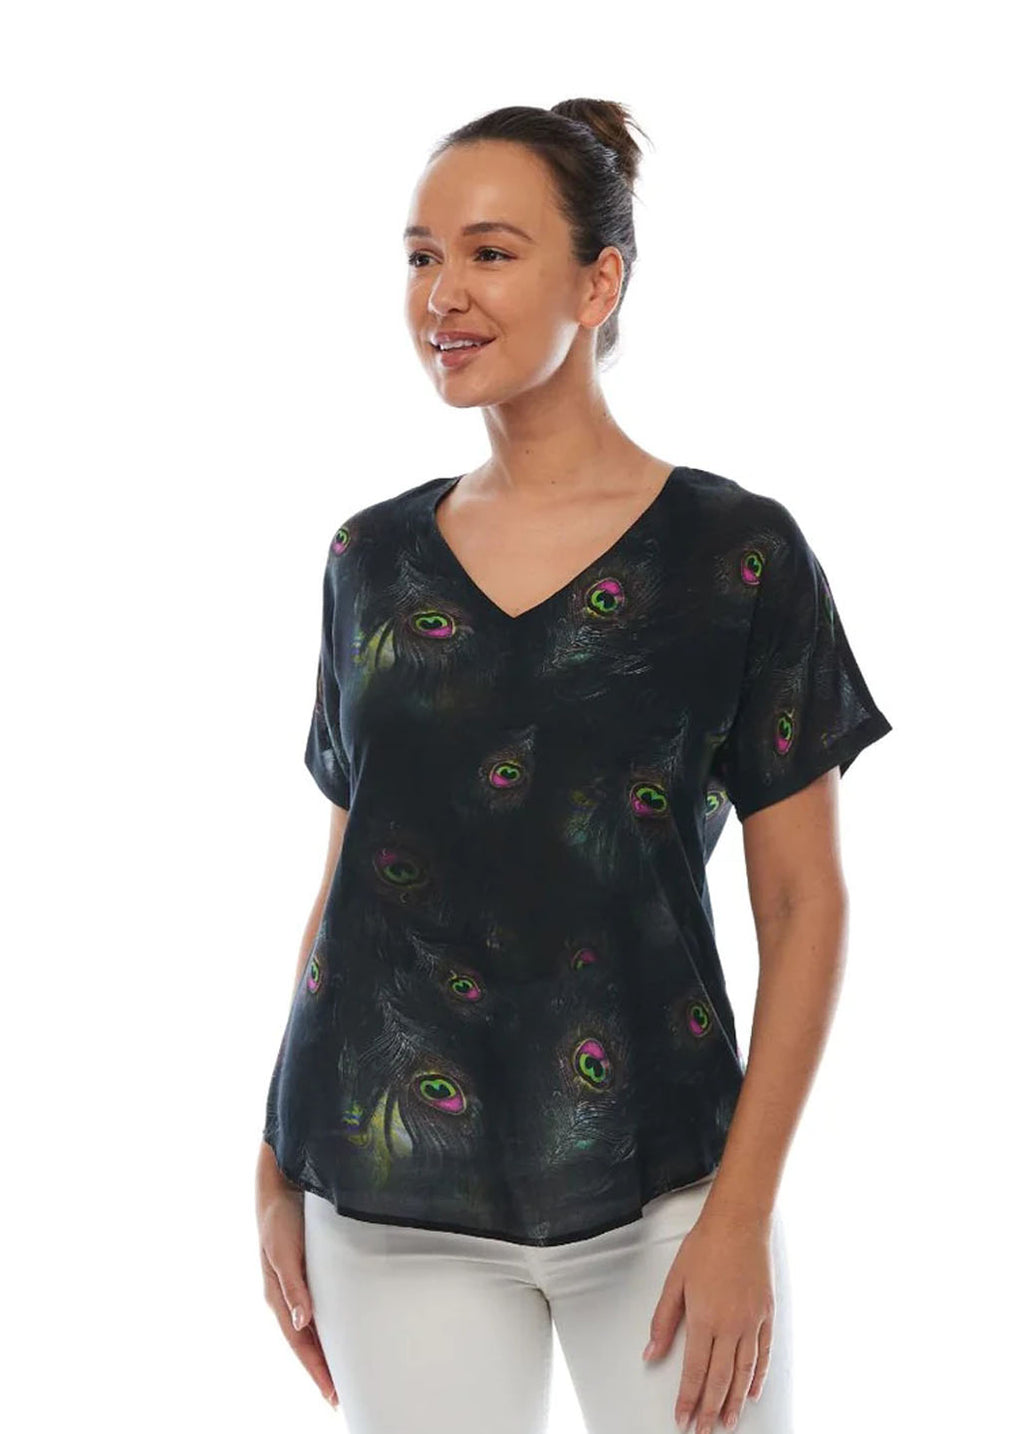 CLAIRE POWELL BLACK PEACOCK SHORT SLEEVE TOP